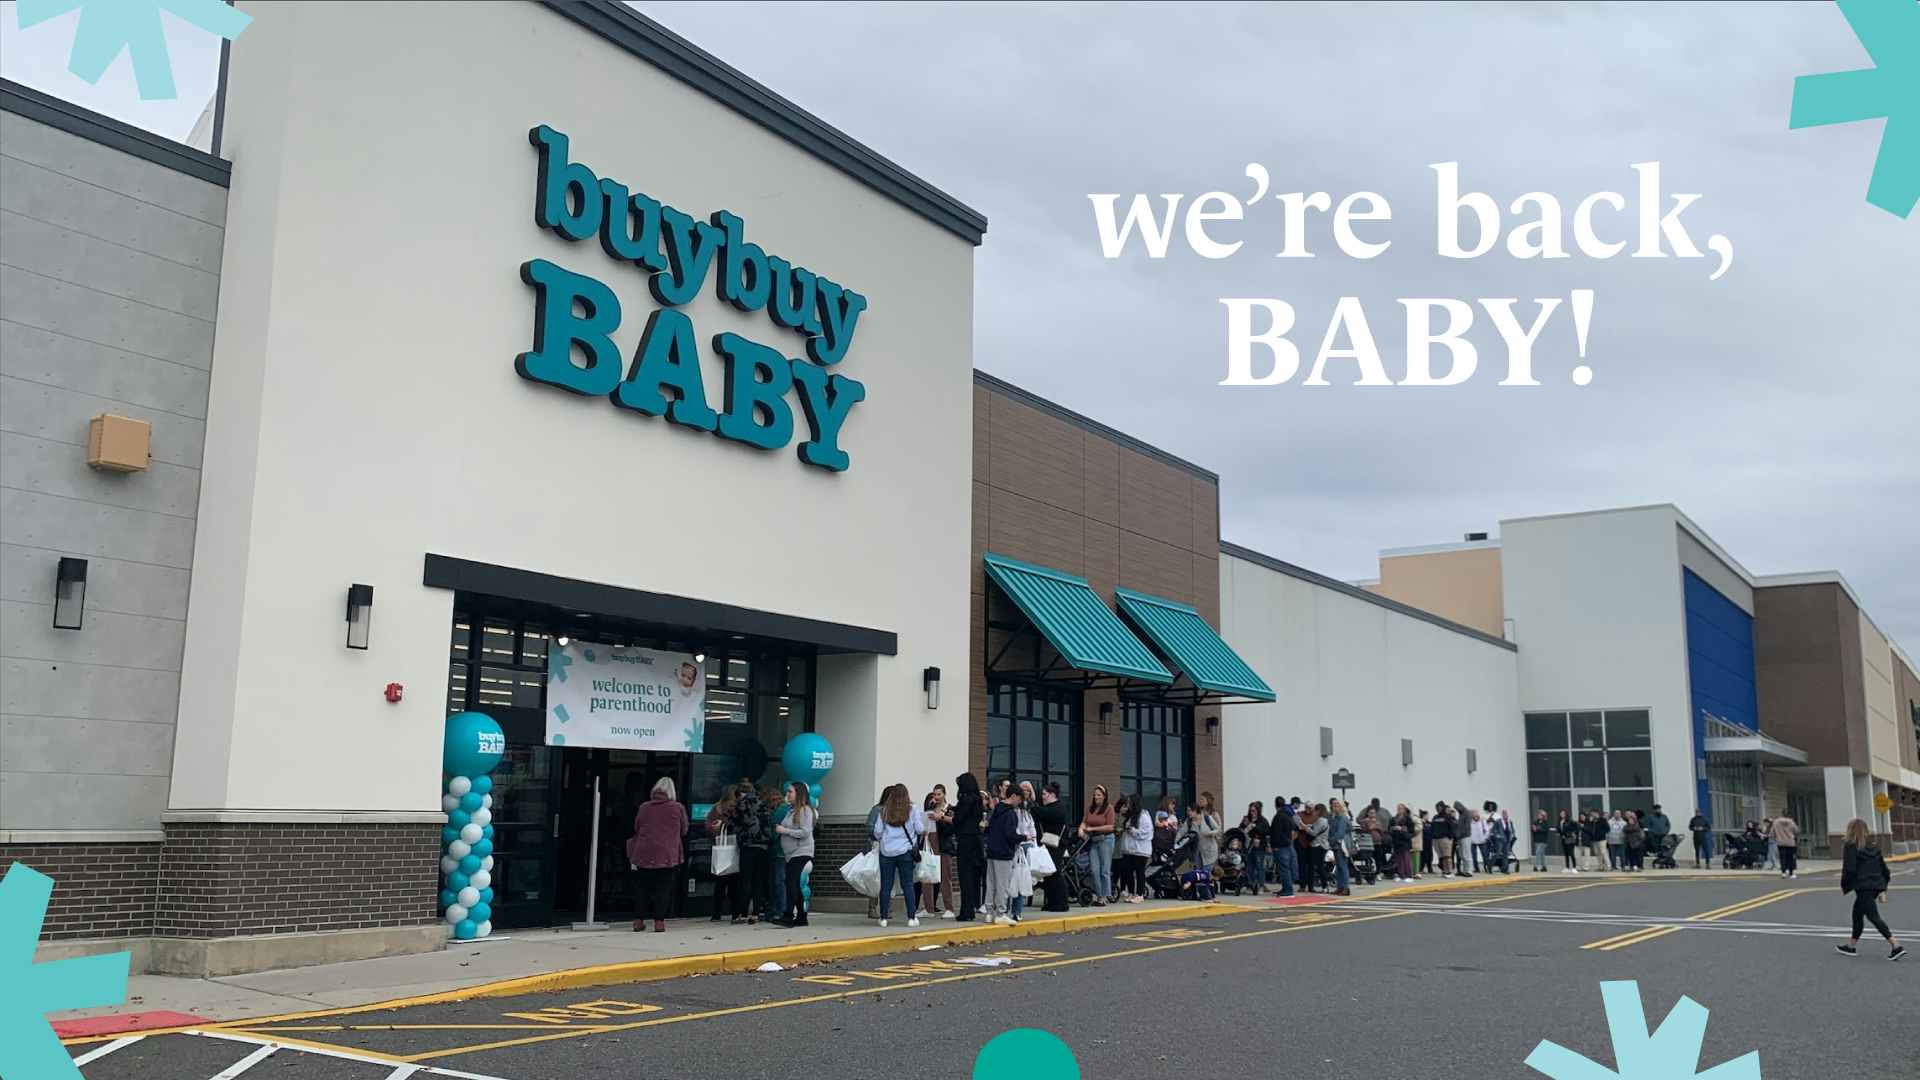 BuyBuy Baby social media graphic saying "we're back baby" in front of a newly reopened location.